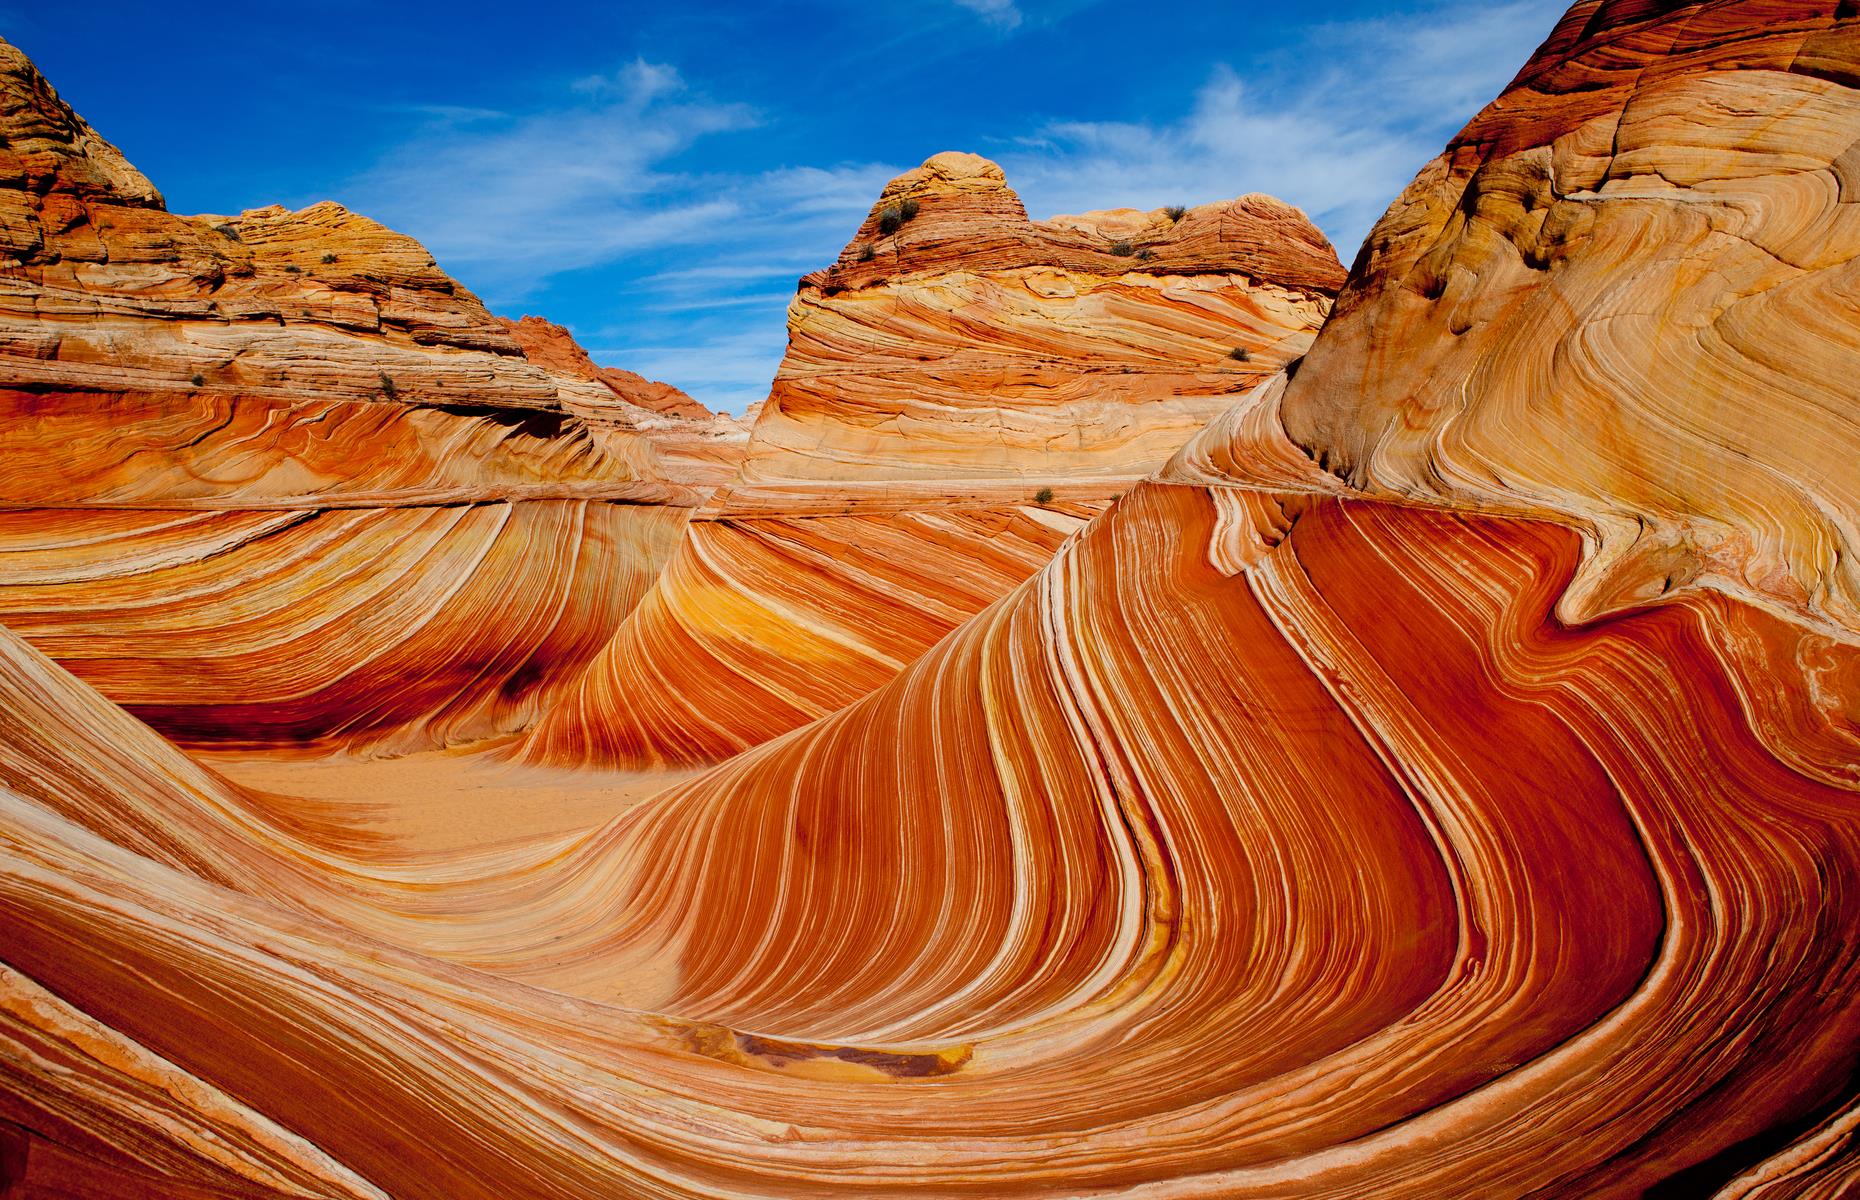 <p>Sometimes nature throws a real curveball. In this case, she threw a spinning, swirling, spectacular googly. Photos of this peaches-and-cream sandstone rock formation look like paintings. You can only access the Wave in the Vermillion Cliffs National Monument by entering the permit lottery and if selected, there is a recreation fee to pay when visiting as well.</p>  <p><a href="https://www.loveexploring.com/galleries/131865/exclusive-access-americas-best-travel-destination-lotteries?page=1"><strong>Take a look at America's best travel destination lotteries</strong></a></p>